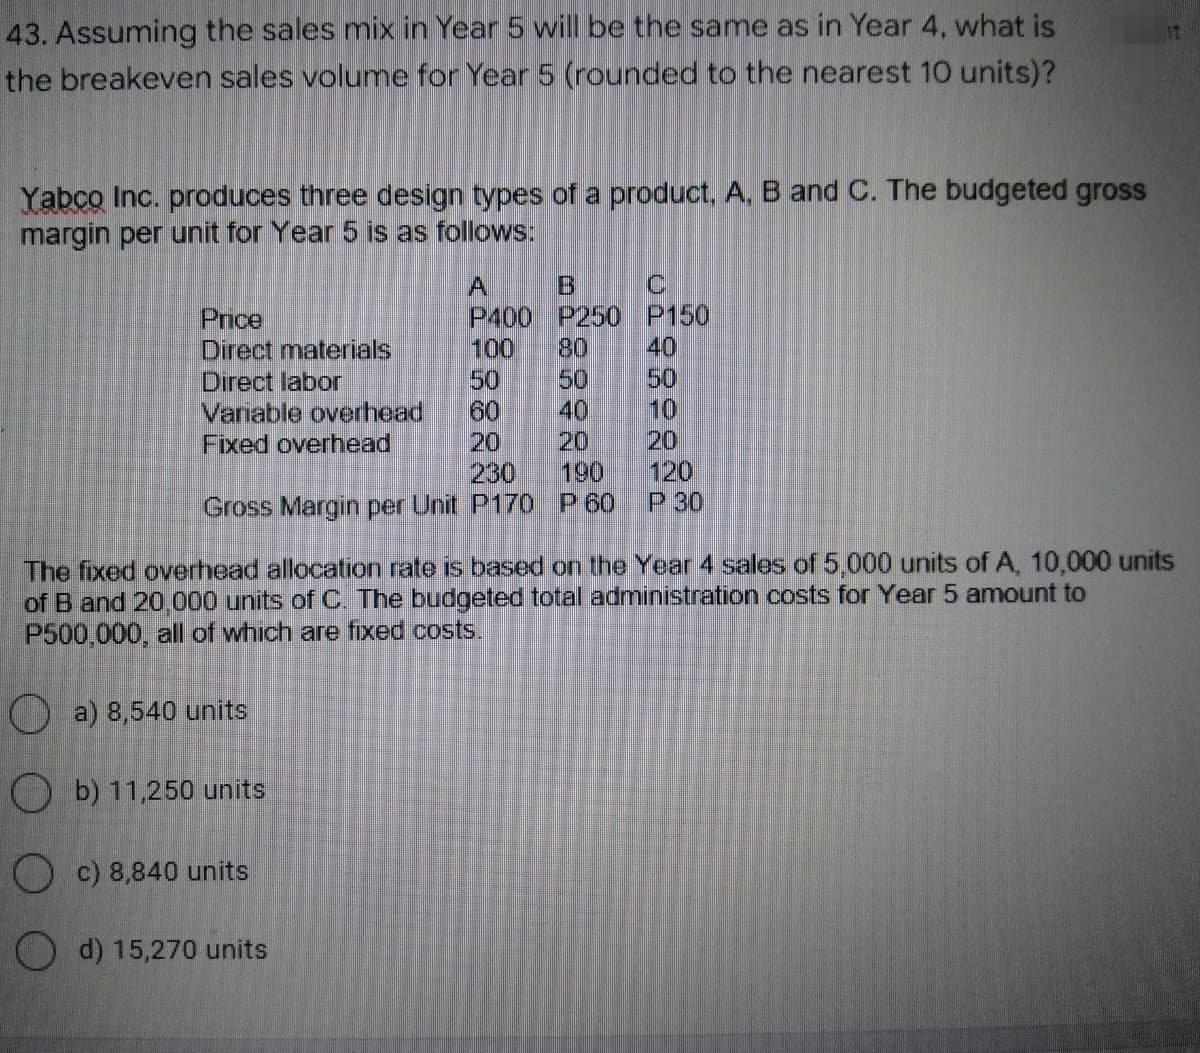 43. Assuming the sales mix in Year 5 will be the same as in Year 4, what is
the breakeven sales volume for Year 5 (rounded to the nearest 10 units)?
Yabco Inc. produces three design types of a product, A, B and C. The budgeted gross
margin per unit for Year 5 is as follows:
A
C
B
P400 P250
Price
P150
Direct materials
100 80 40
Direct labor
50
Variable overhead
60
10
Fixed overhead
20
230
120
Gross Margin per Unit P170 P 60
P 30
The fixed overhead allocation rate is based on the Year 4 sales of 5,000 units of A, 10,000 units
of B and 20,000 units of C. The budgeted total administration costs for Year 5 amount to
P500,000, all of which are fixed costs.
a) 8,540 units
Ob) 11,250 units
c) 8,840 units
d) 15,270 units